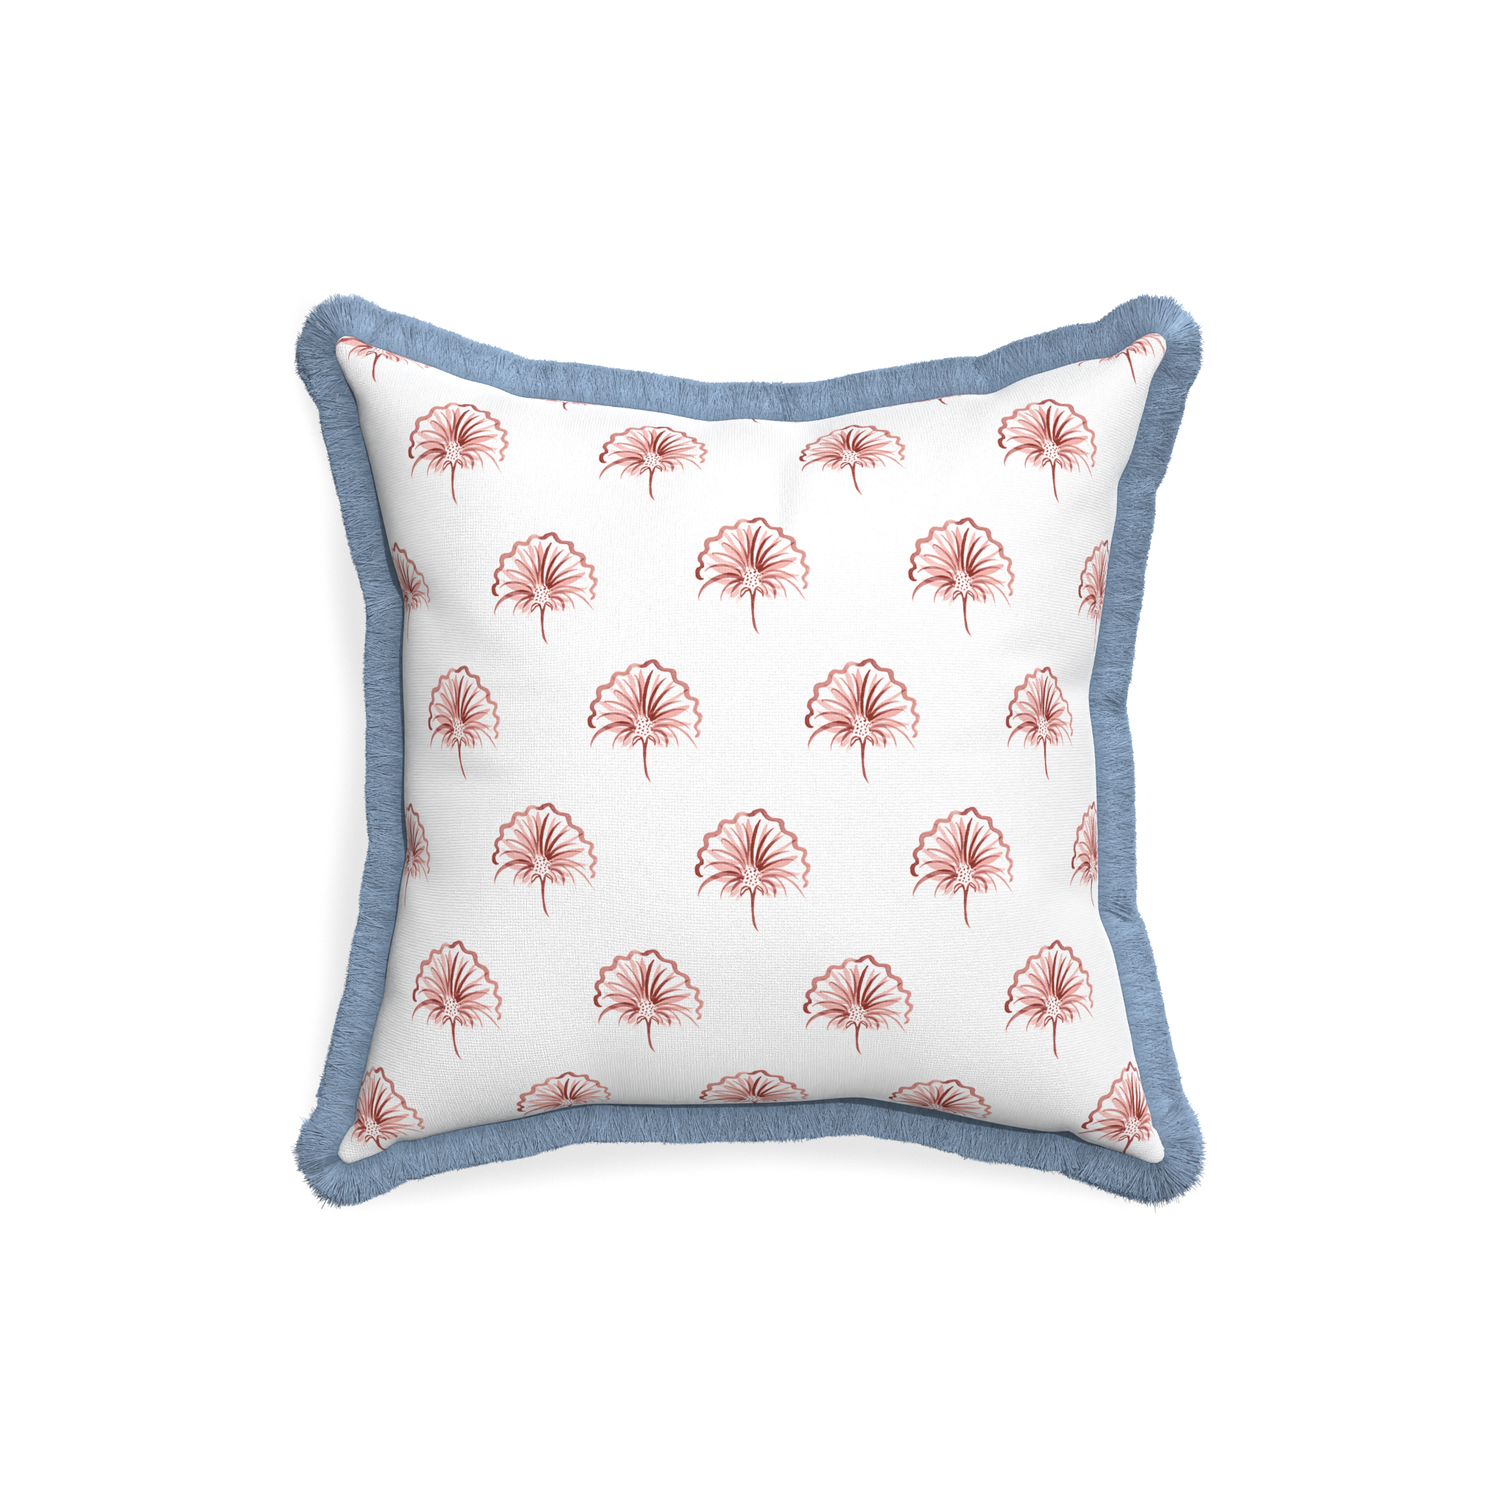 18-square penelope rose custom floral pinkpillow with sky fringe on white background